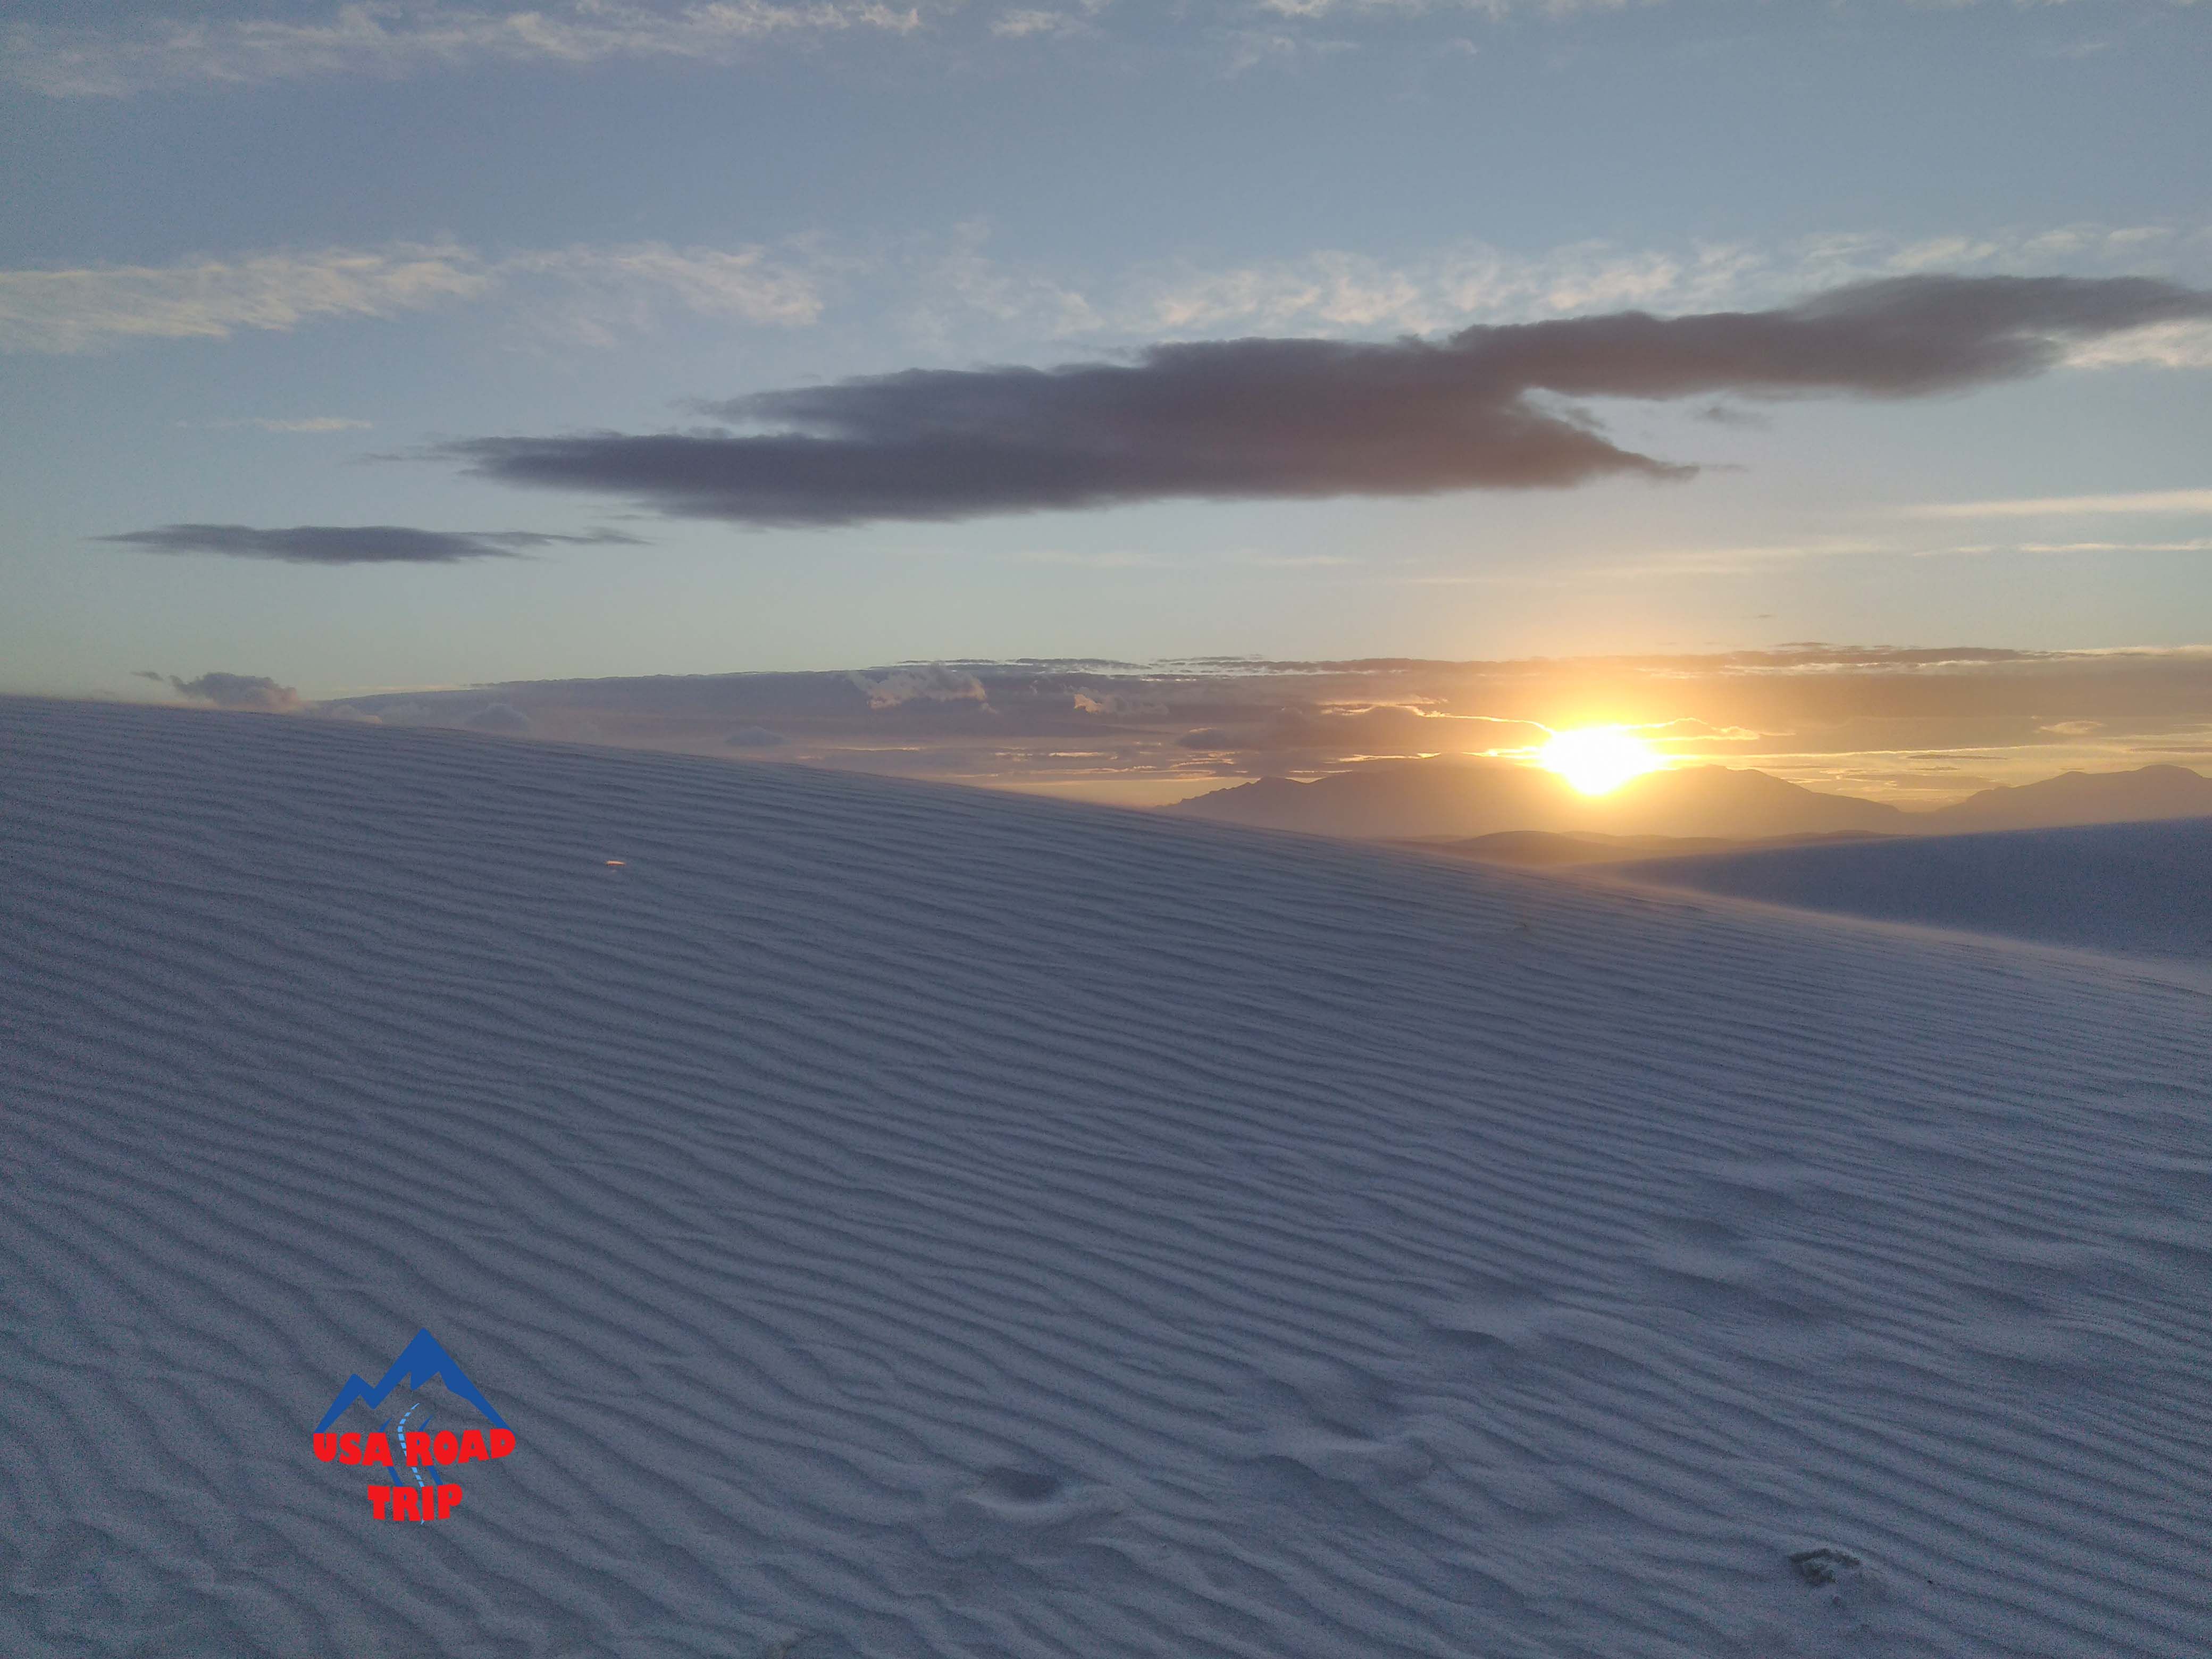 #1 Sunsets are magical at the White Sands